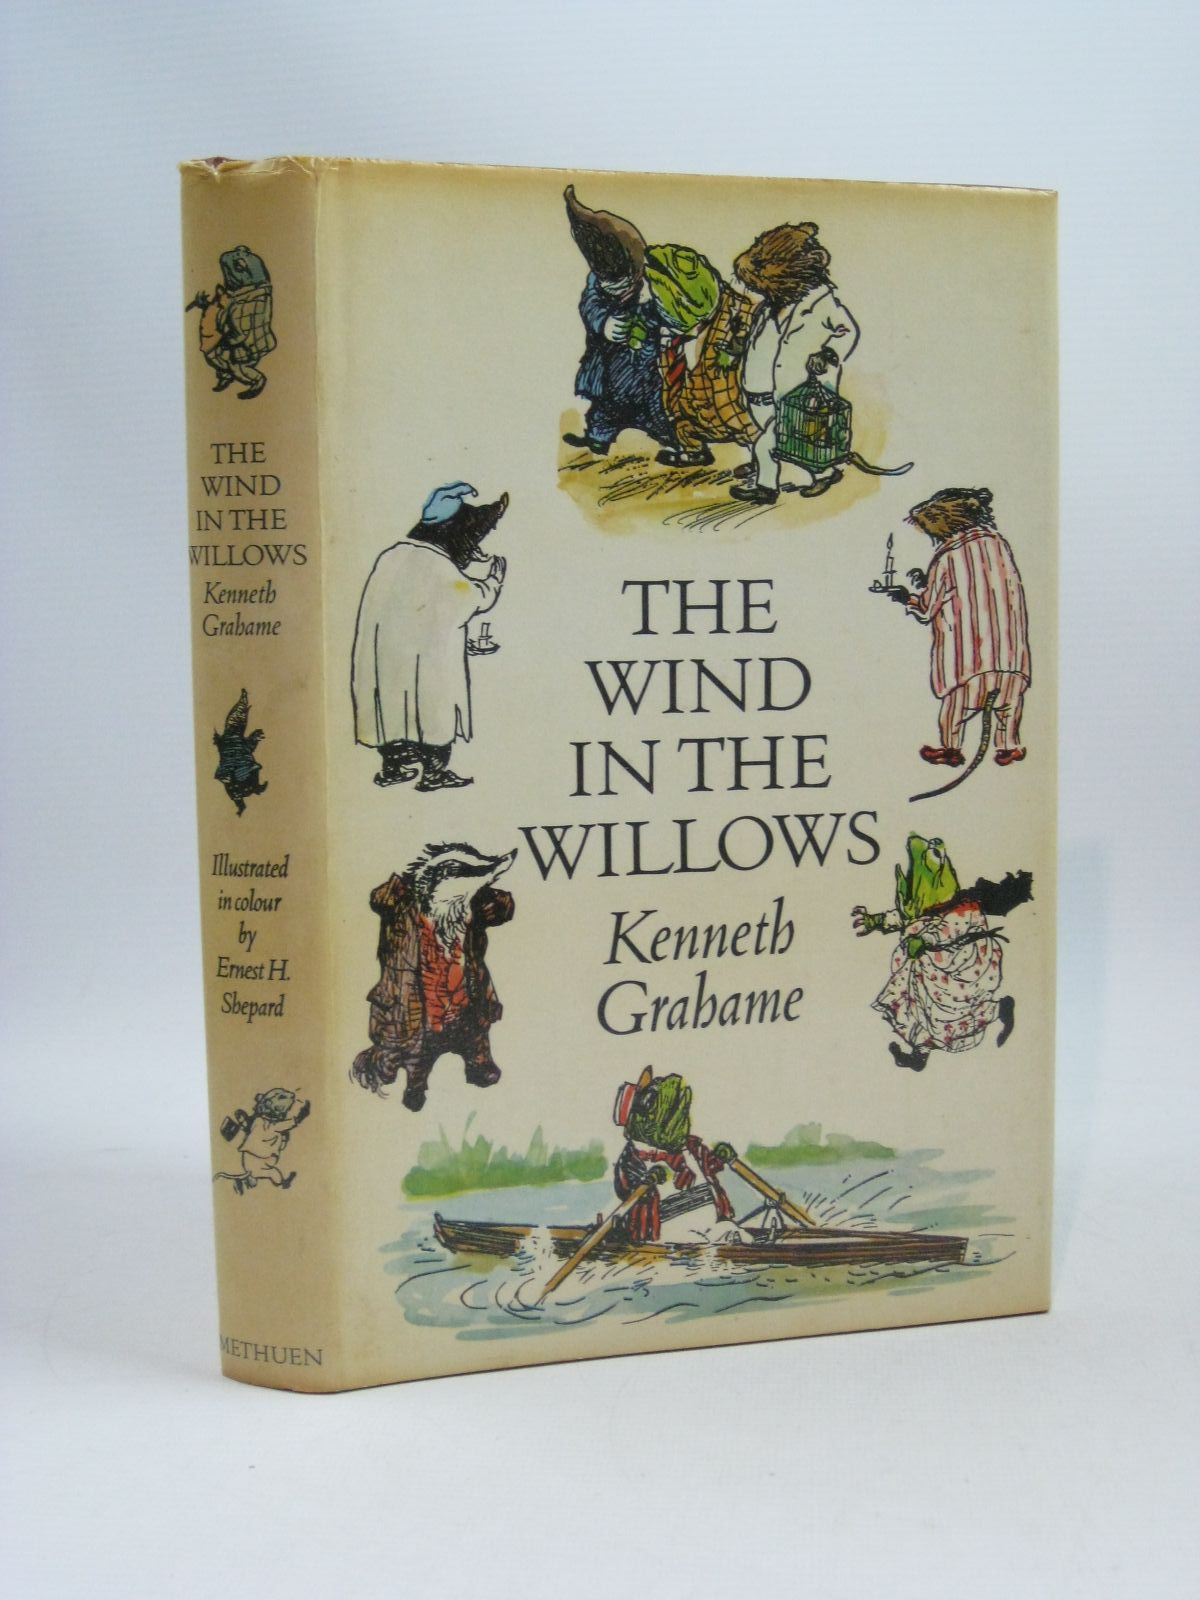 The Wind in the Willows by Kenneth Grahame | Featured Books : Stella ...